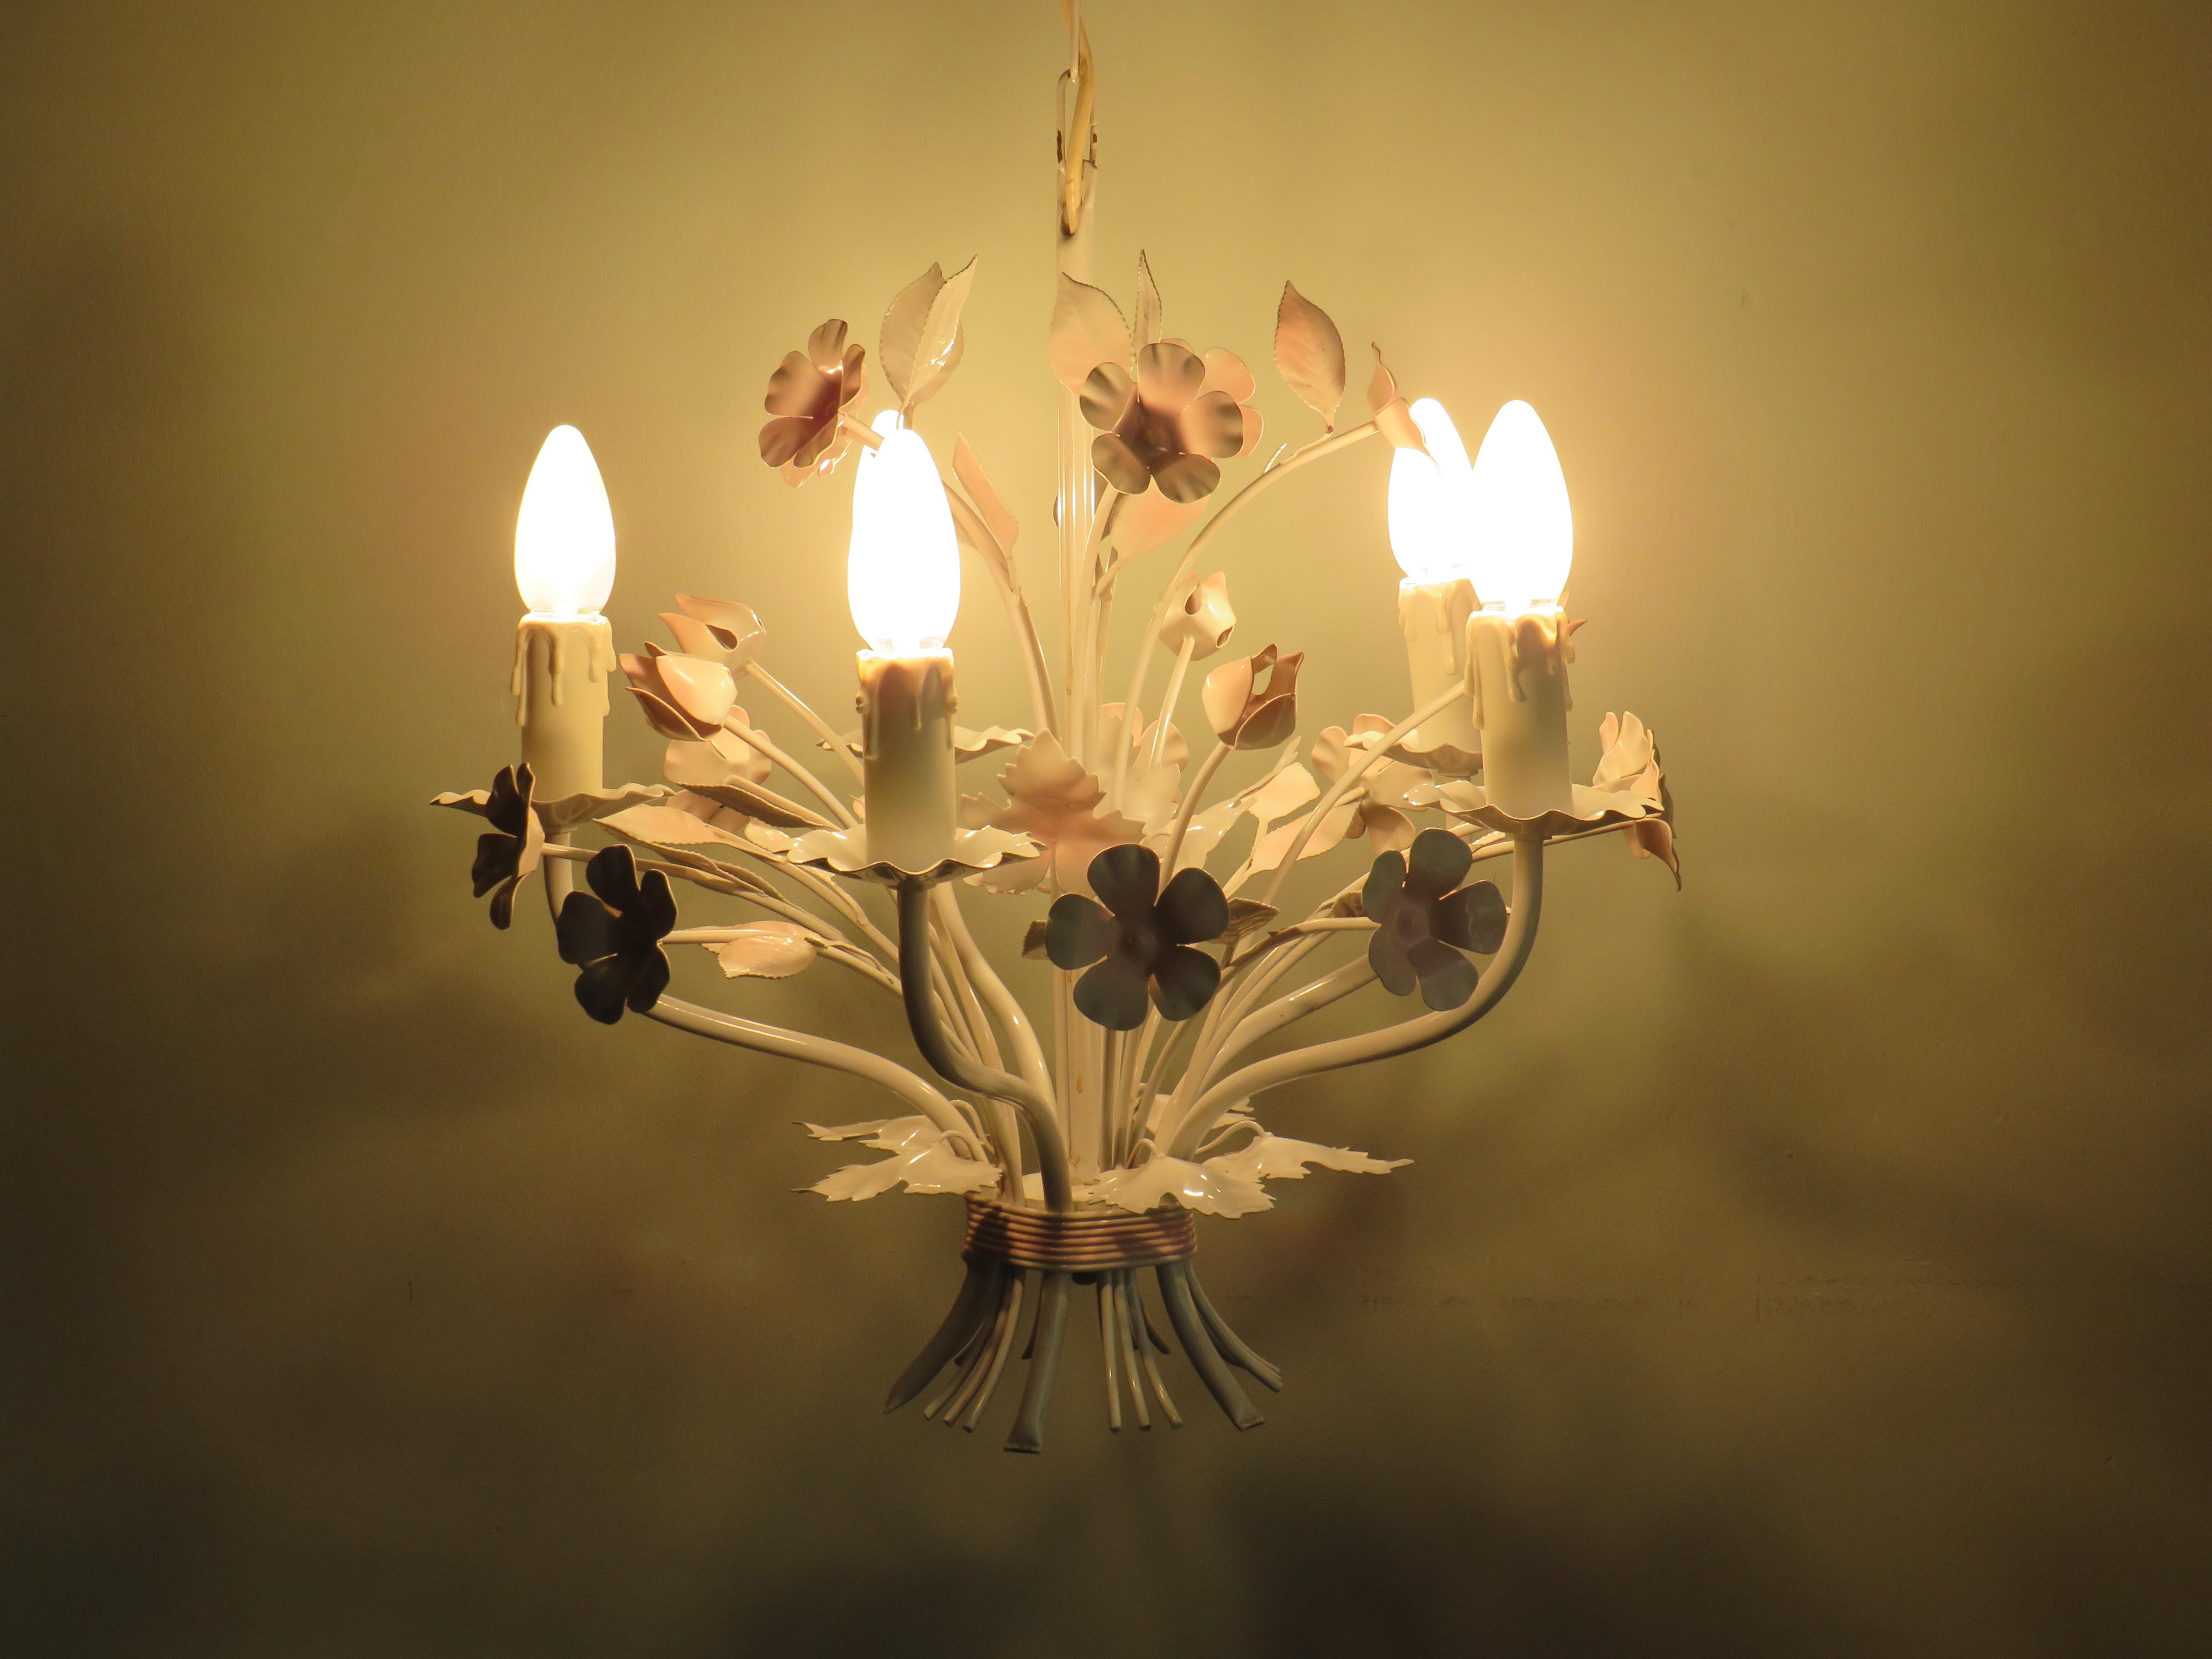 Vintage Toleware chandelier with floral motifs, Italy 1960s.
The chandelier has 5 light points (E 14) in the shape of dripping candles, furthermore the chandelier is equipped with many leaves, flowers and flower buds that meet at the bottom and